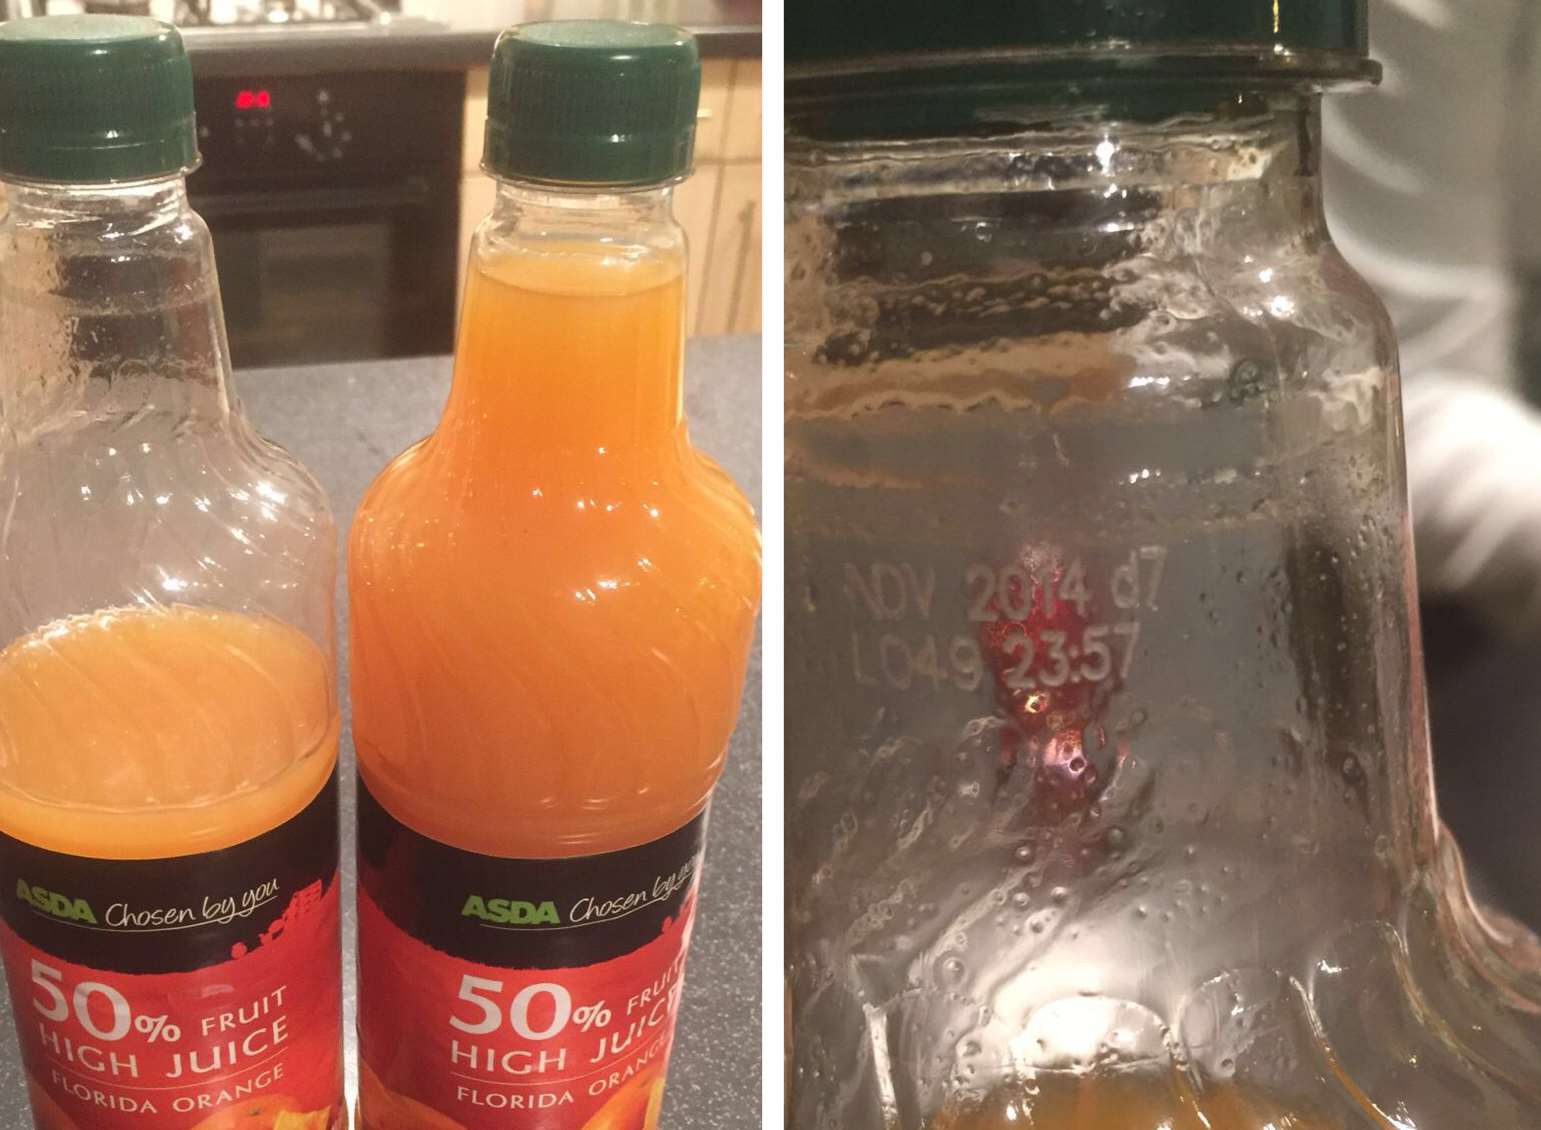 The fruit squash expired more than a year ago